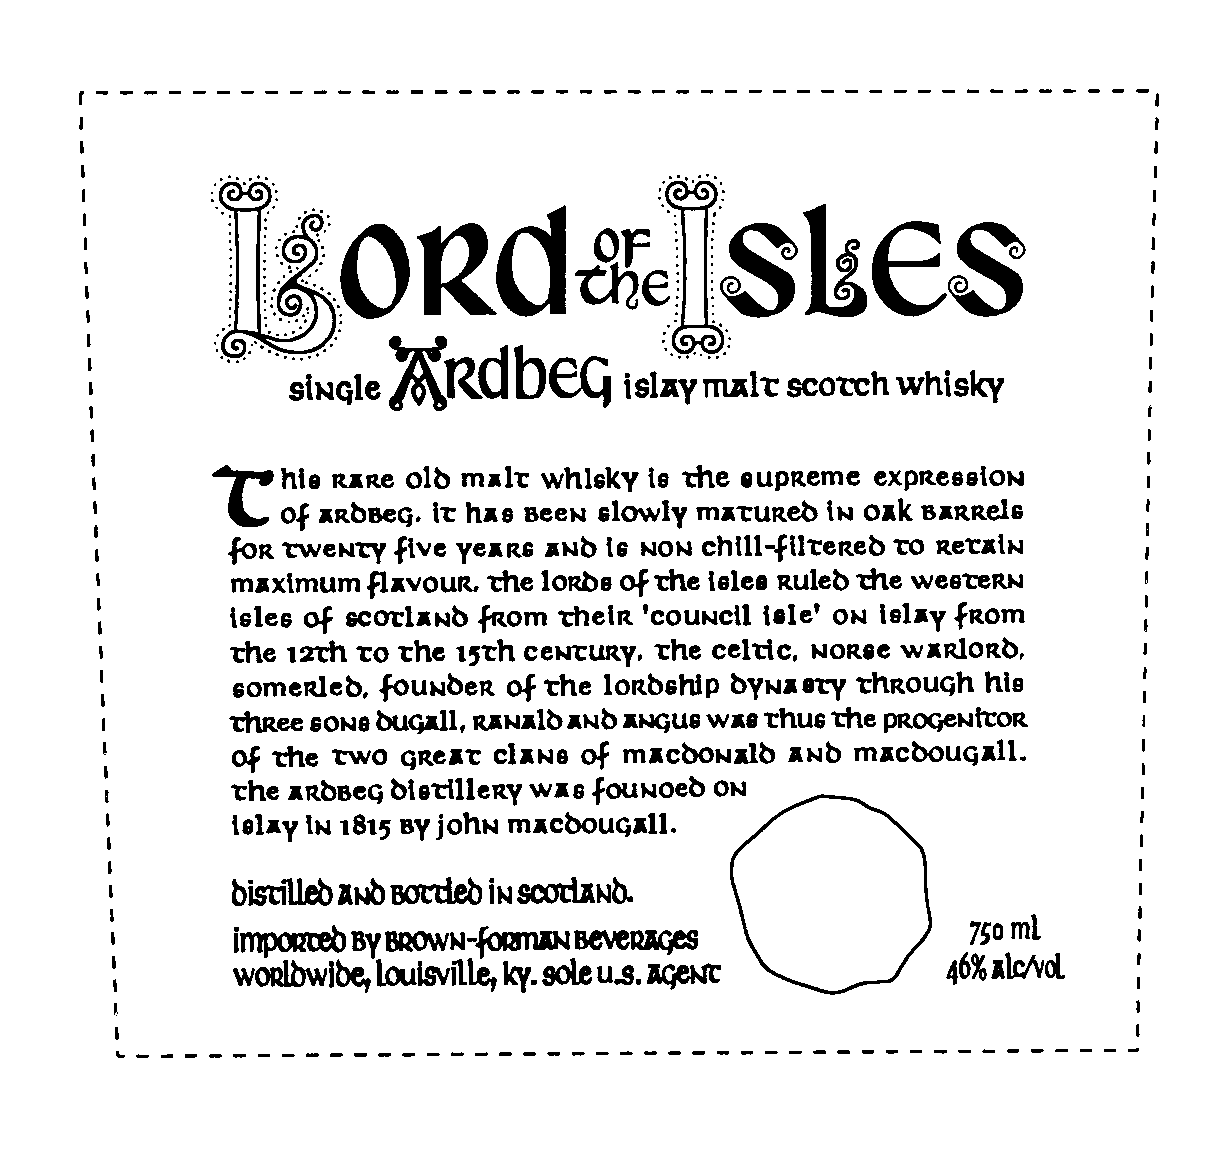  LORD OF THE ISLES SINGLE ARDBEG ISLAY MALT SCOTCH WHISKY THIS RARE OLD MALT WHISKY IS THE SUPREME EXPRESSION OF ARDBEG, IT HAS BEEN SLOWLY MATURED IN OAK BARRELS FOR TWENTY FIVE YEARS AND IS NON CHILL-FILTERED TO RETAIN MAXIMUM FLAVOUR, THE LORDS OF THE IS